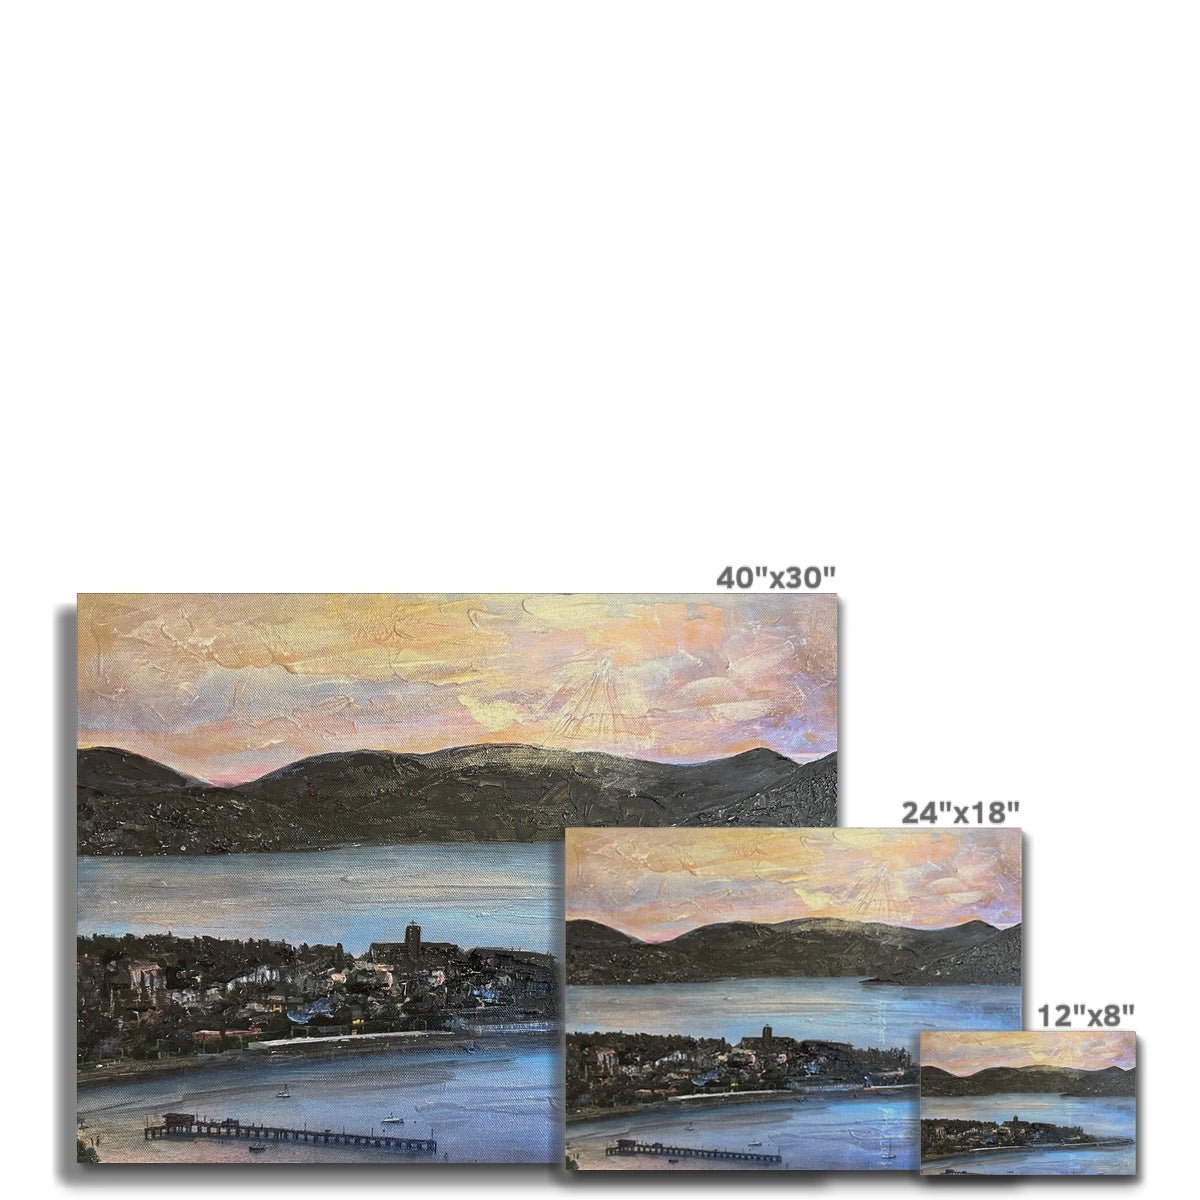 From Lyle Hill Painting | Canvas From Scotland-Contemporary Stretched Canvas Prints-River Clyde Art Gallery-Paintings, Prints, Homeware, Art Gifts From Scotland By Scottish Artist Kevin Hunter